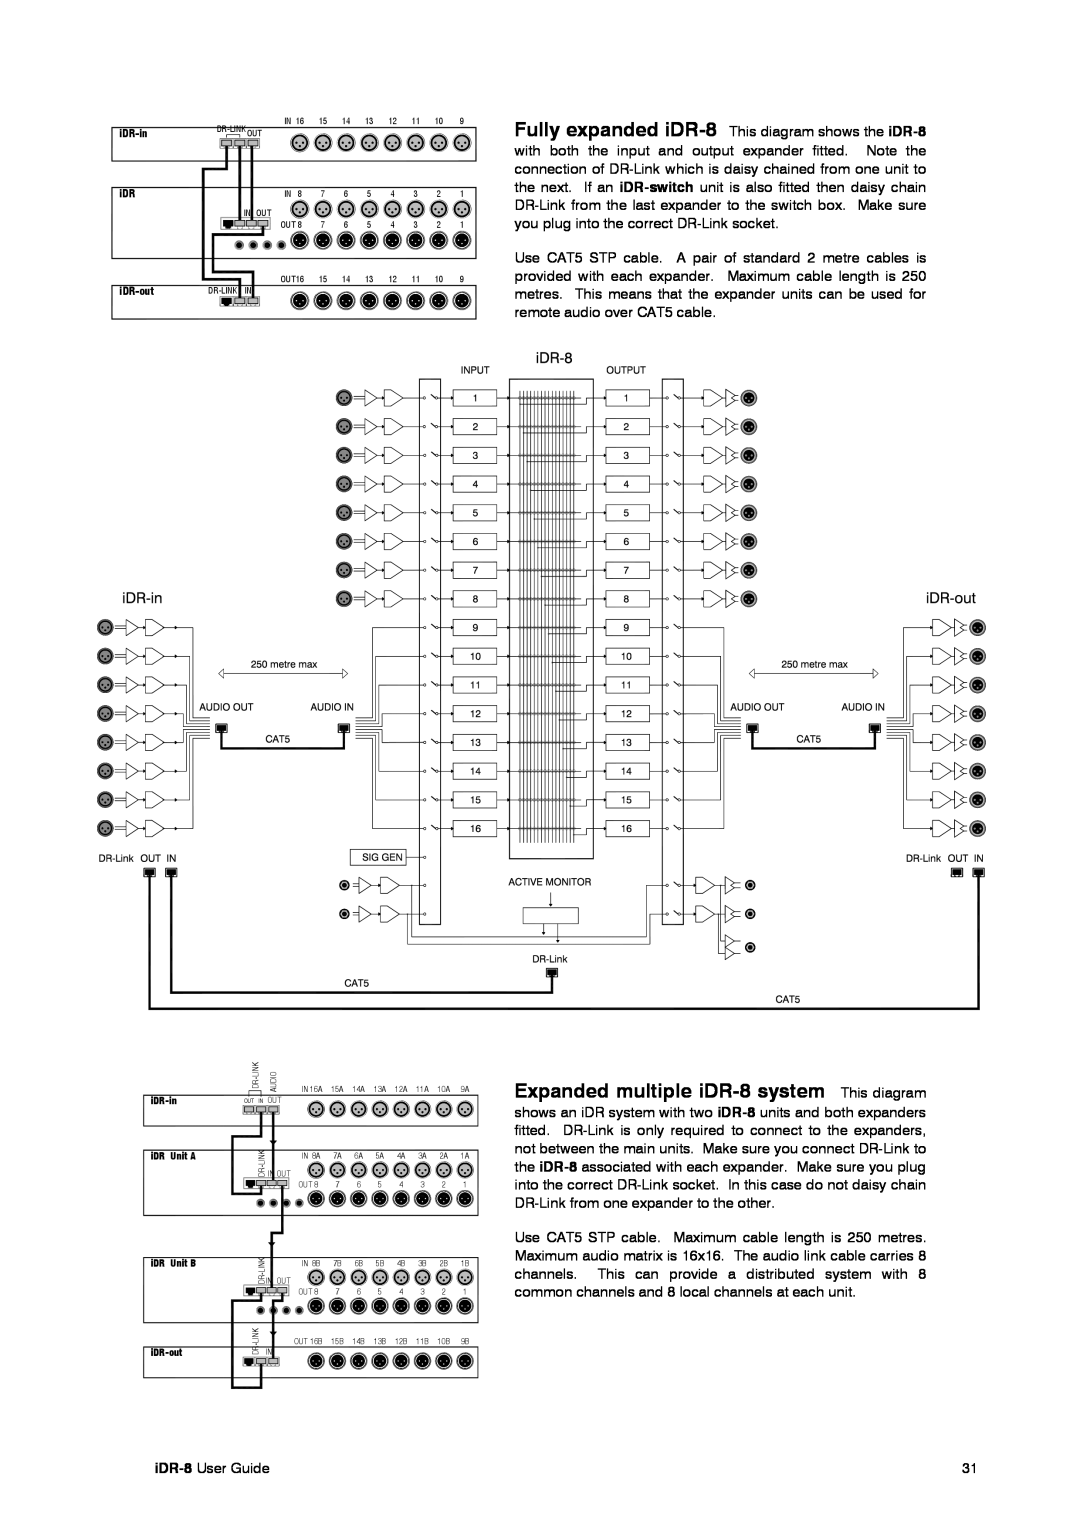 Compex Systems AP4530 manual Expanded multiple iDR-8 system This diagram, Out In, Dr-Linkin 